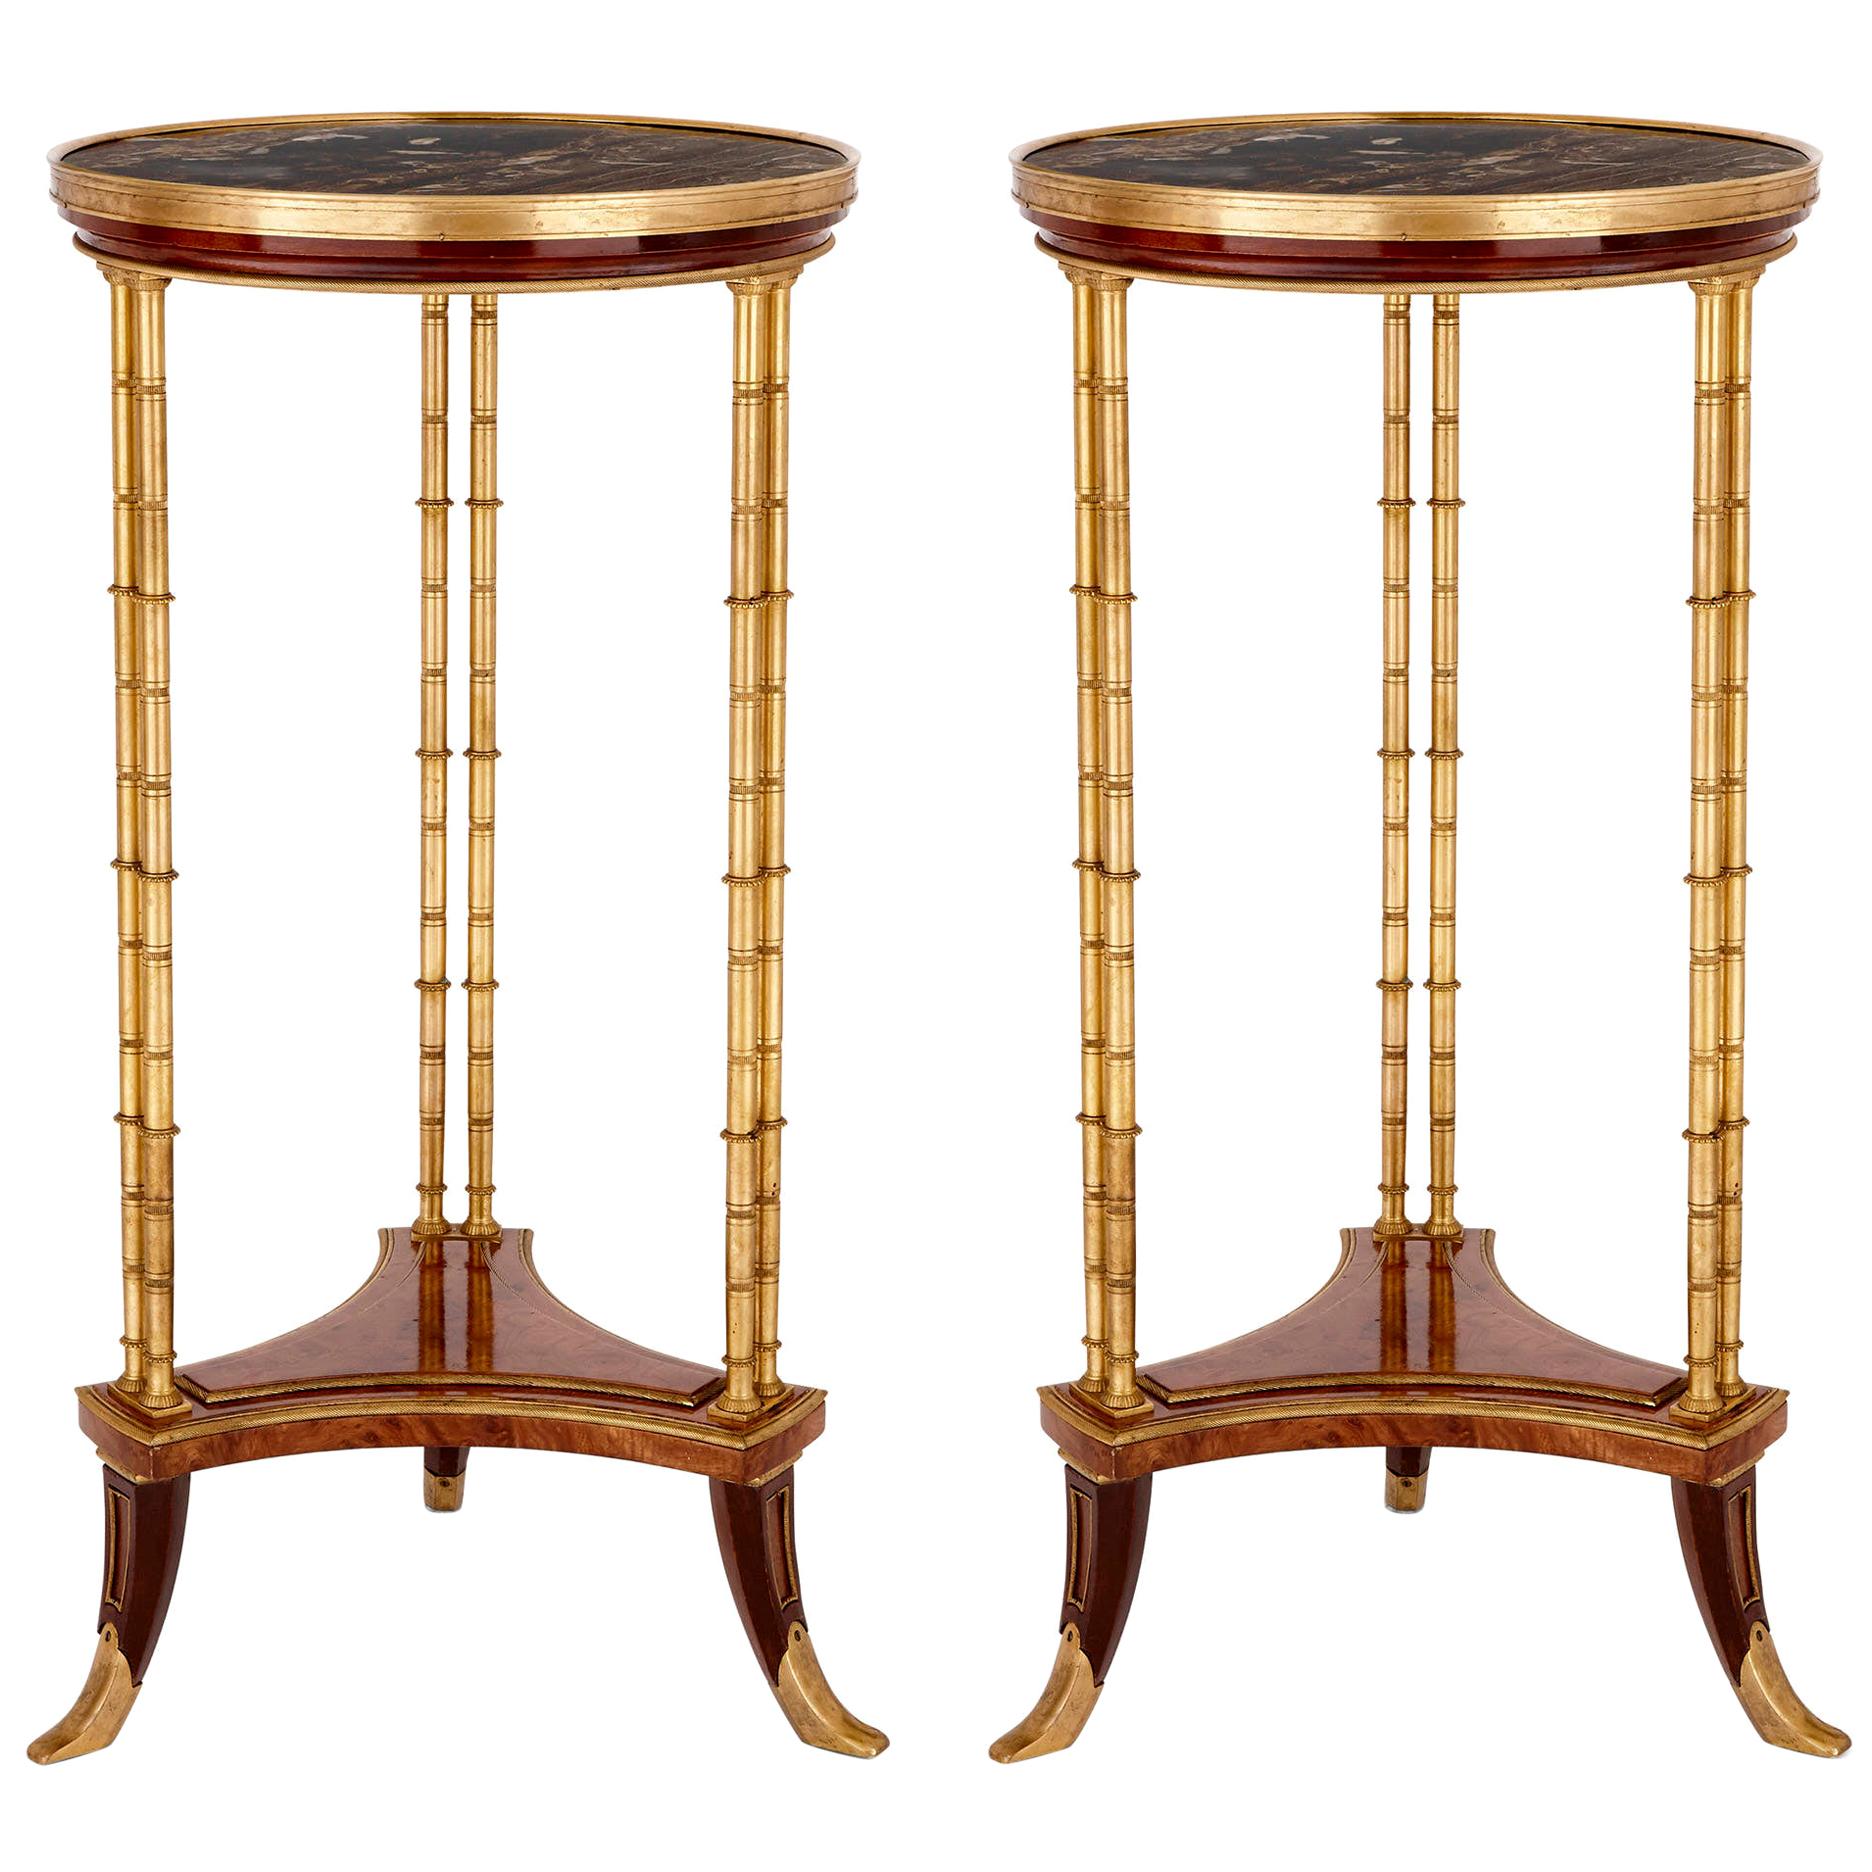 Two Neoclassical Style Marble, Gilt Bronze and Mahogany Side Tables